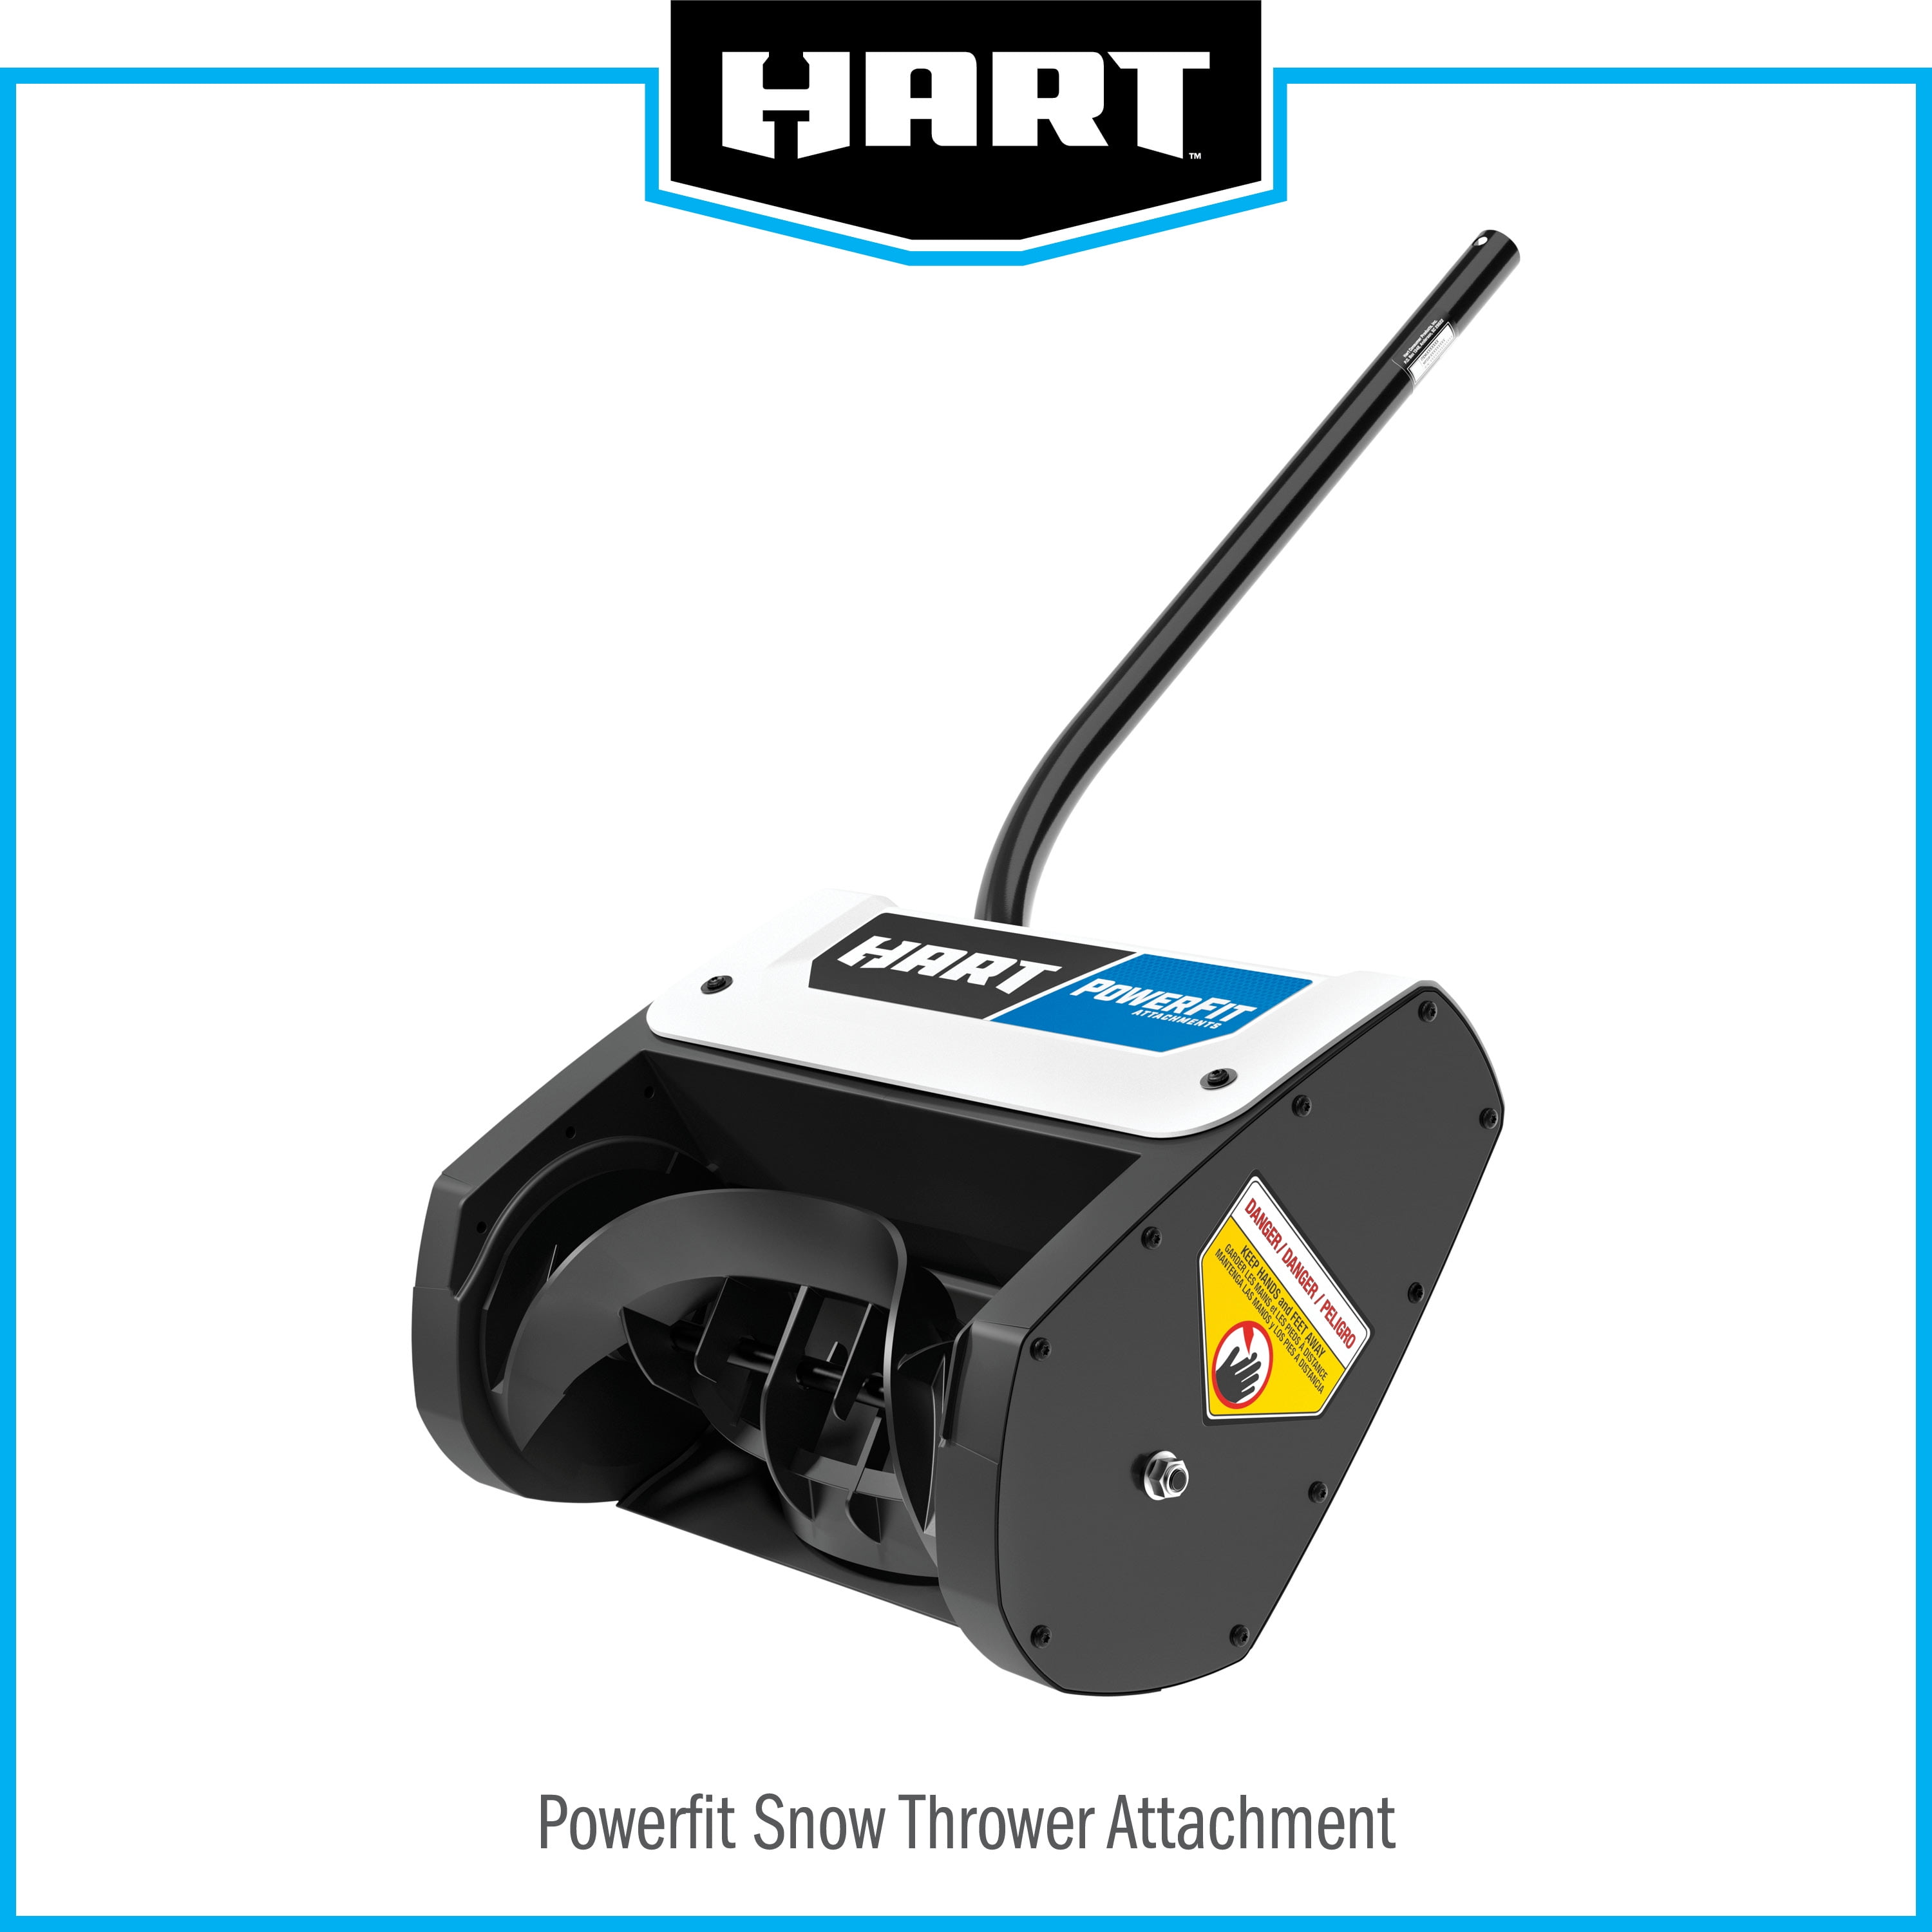 HART Powerfit Snow Thrower Attachment (For Attachment Capable Trim) 